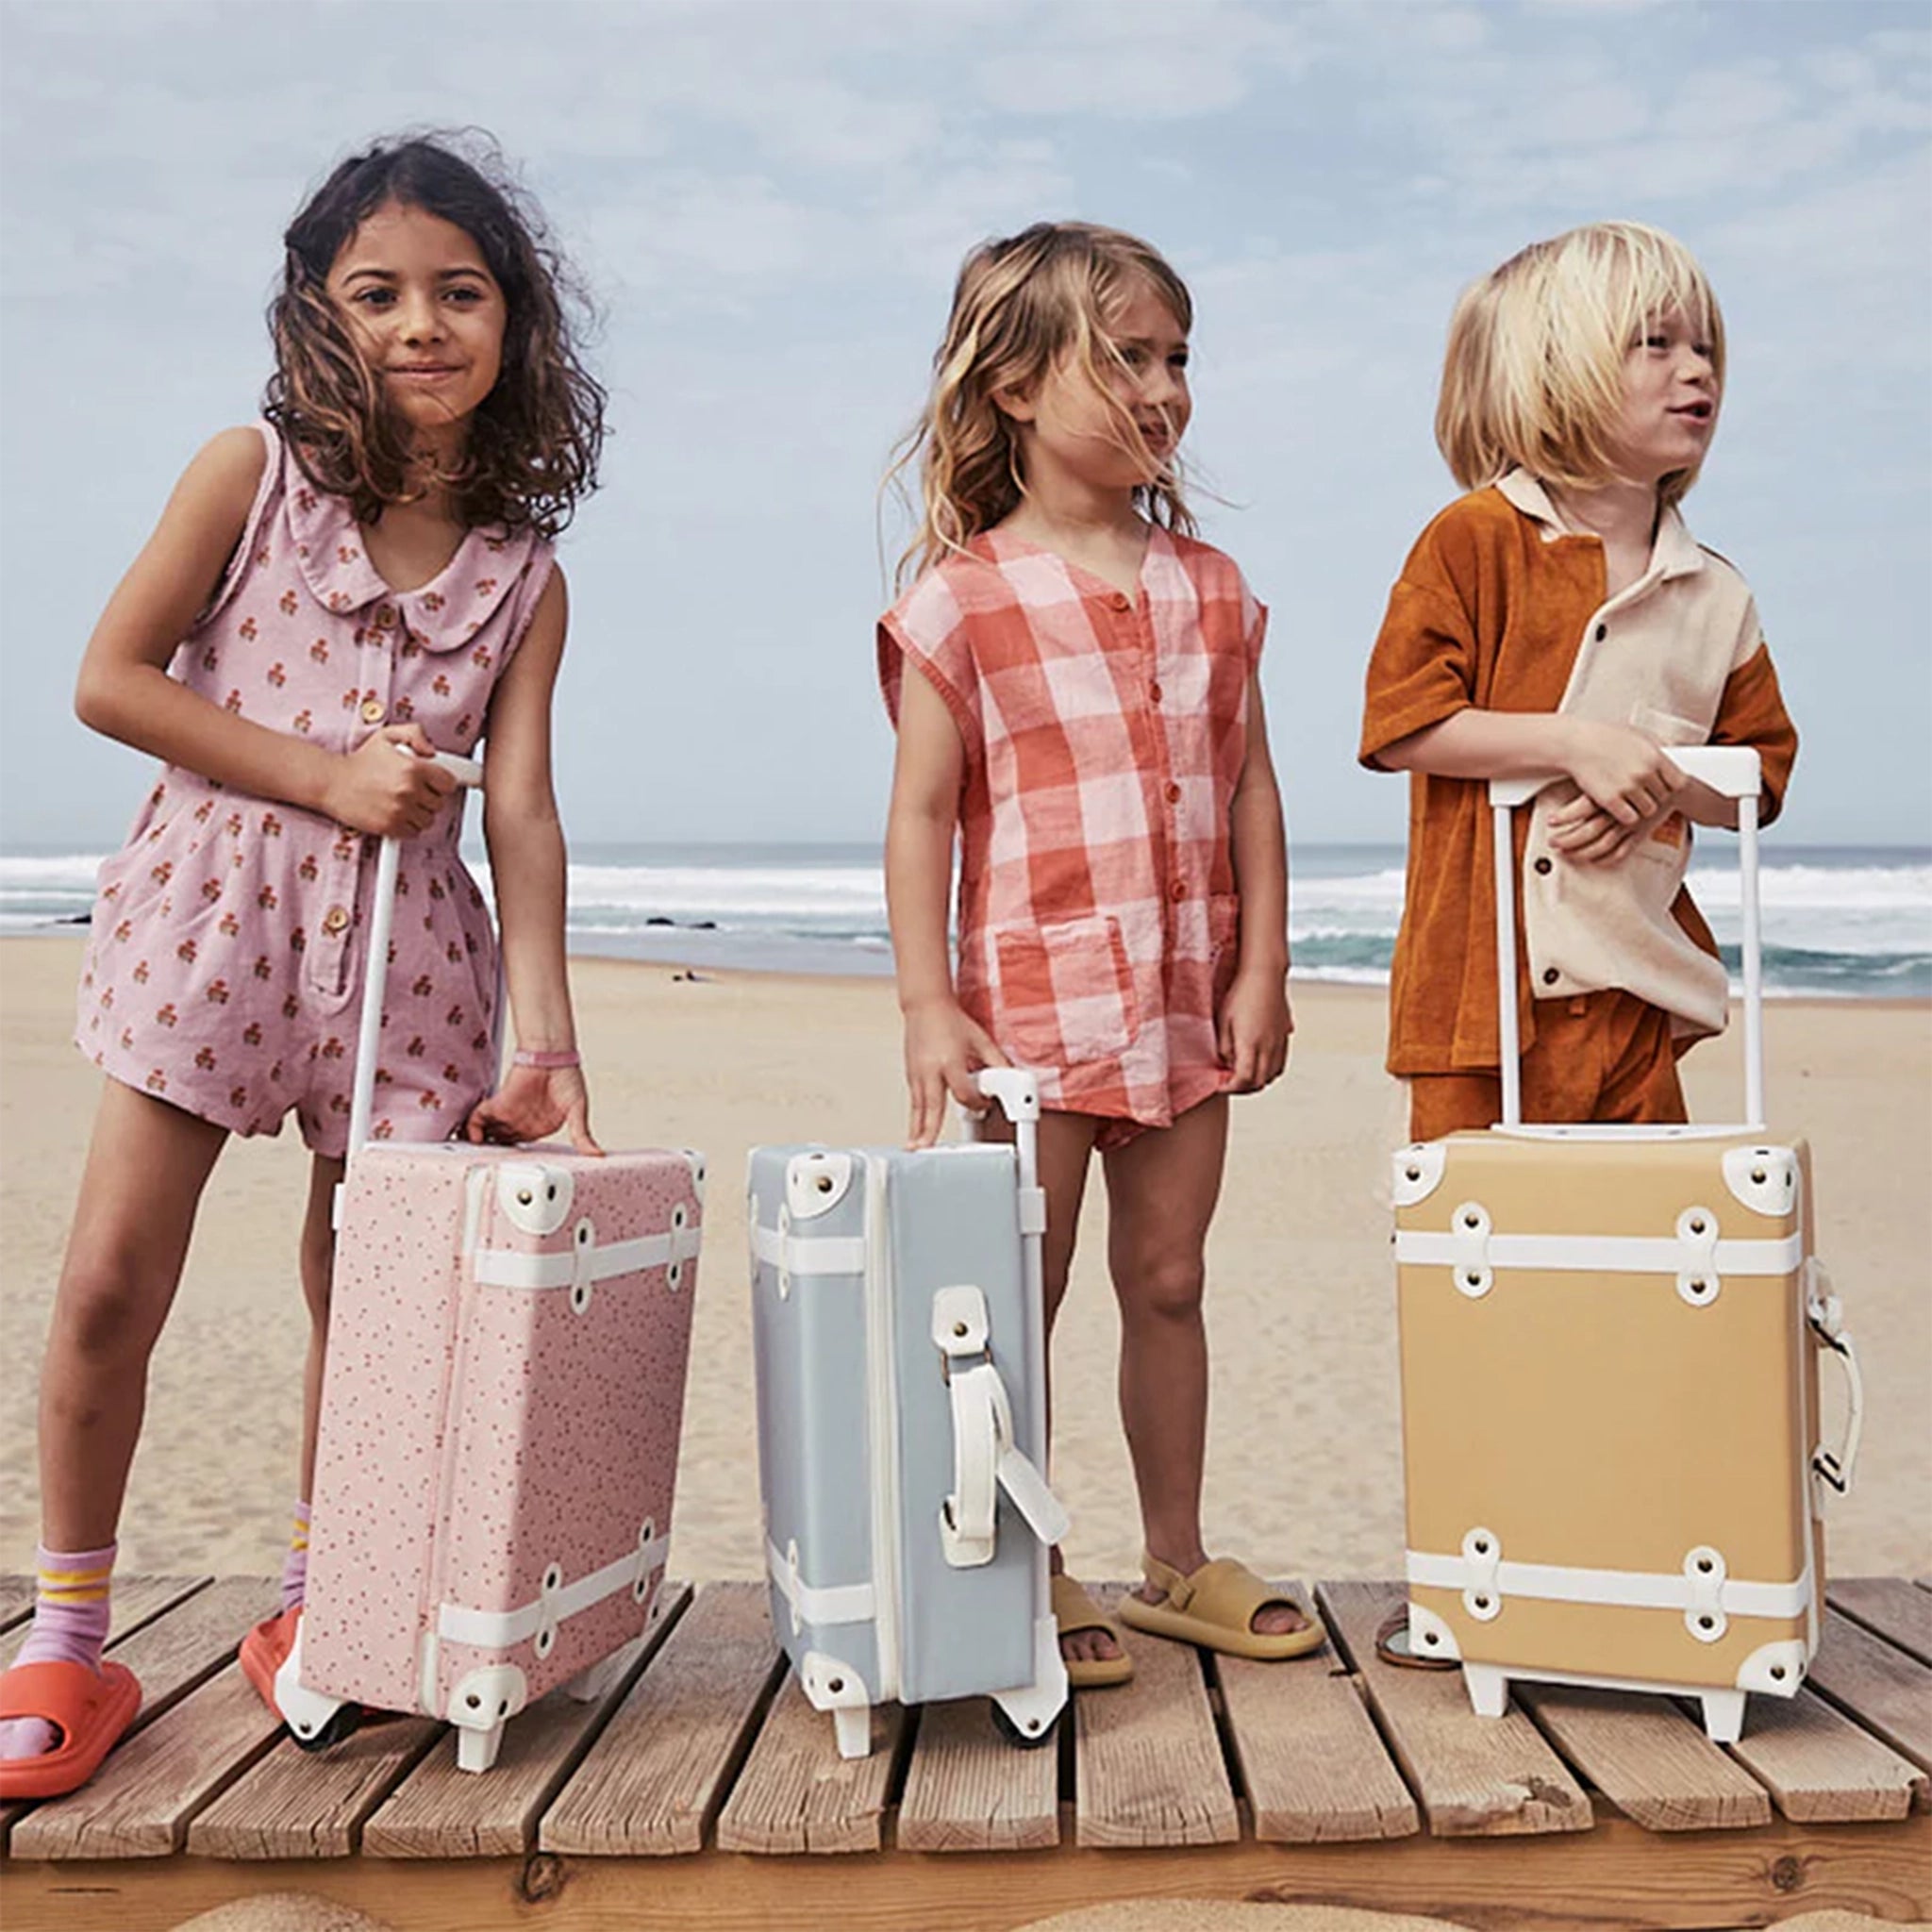 A tan/light orange and white kids suitcase standing next to children models also holding their suitcases. 